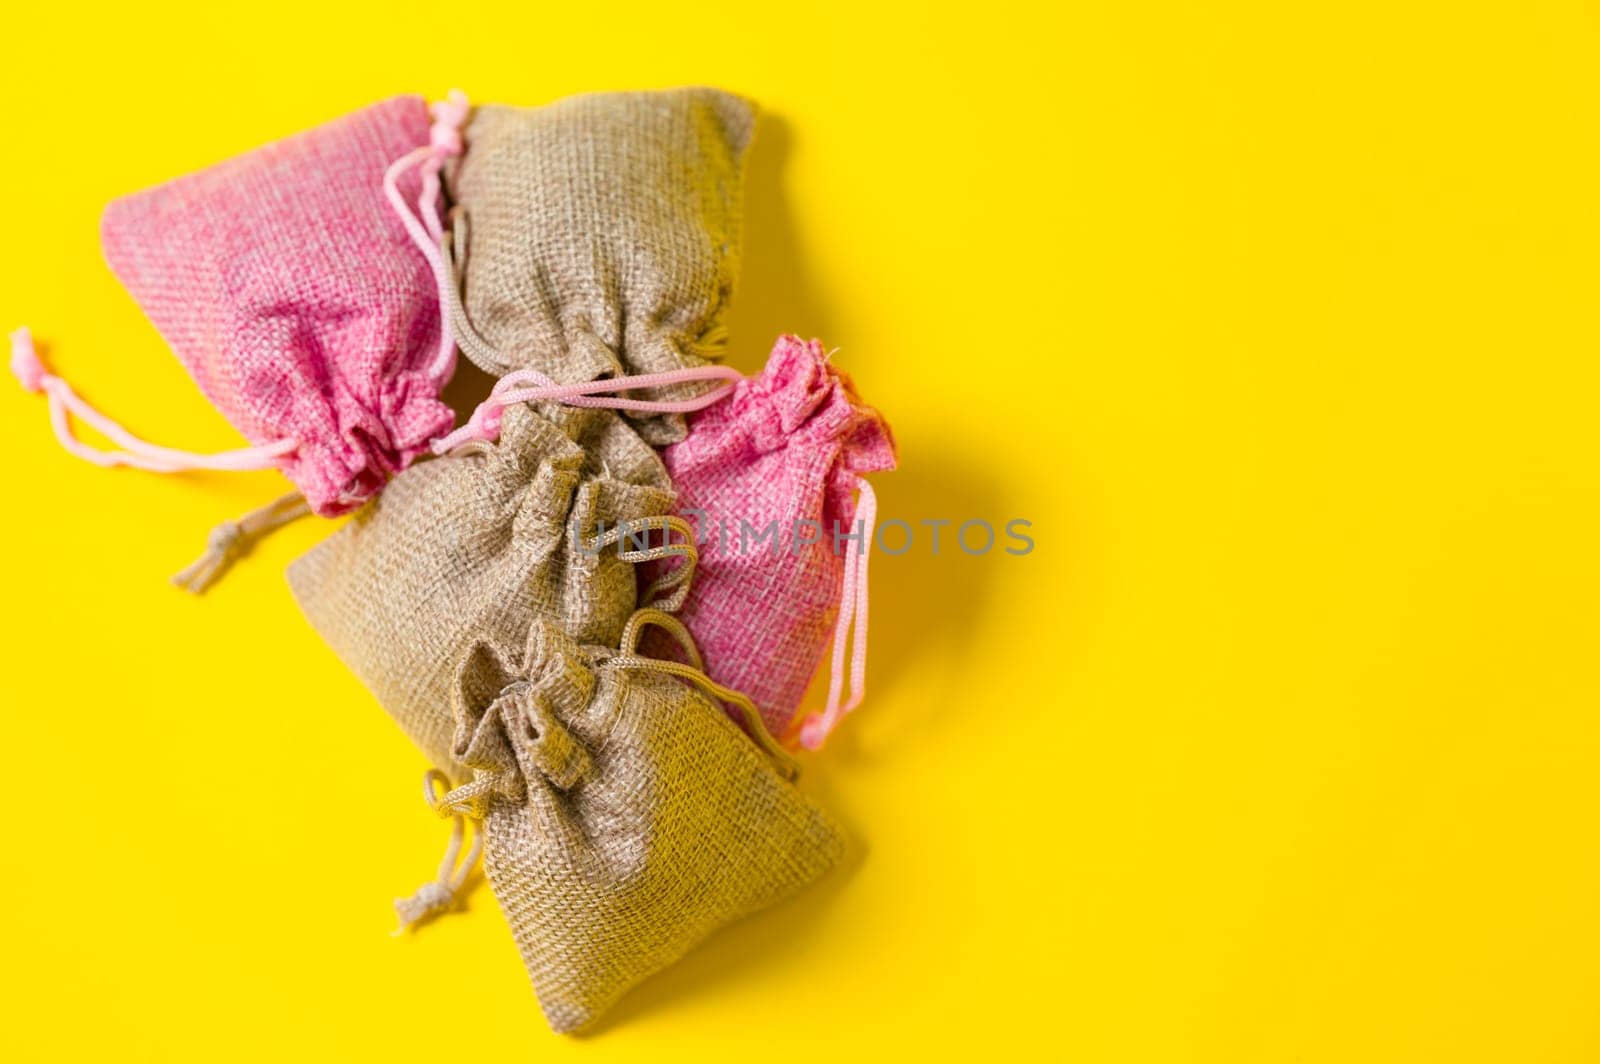 Lavender flower in a linen bag on a yellow background. by Niko_Cingaryuk